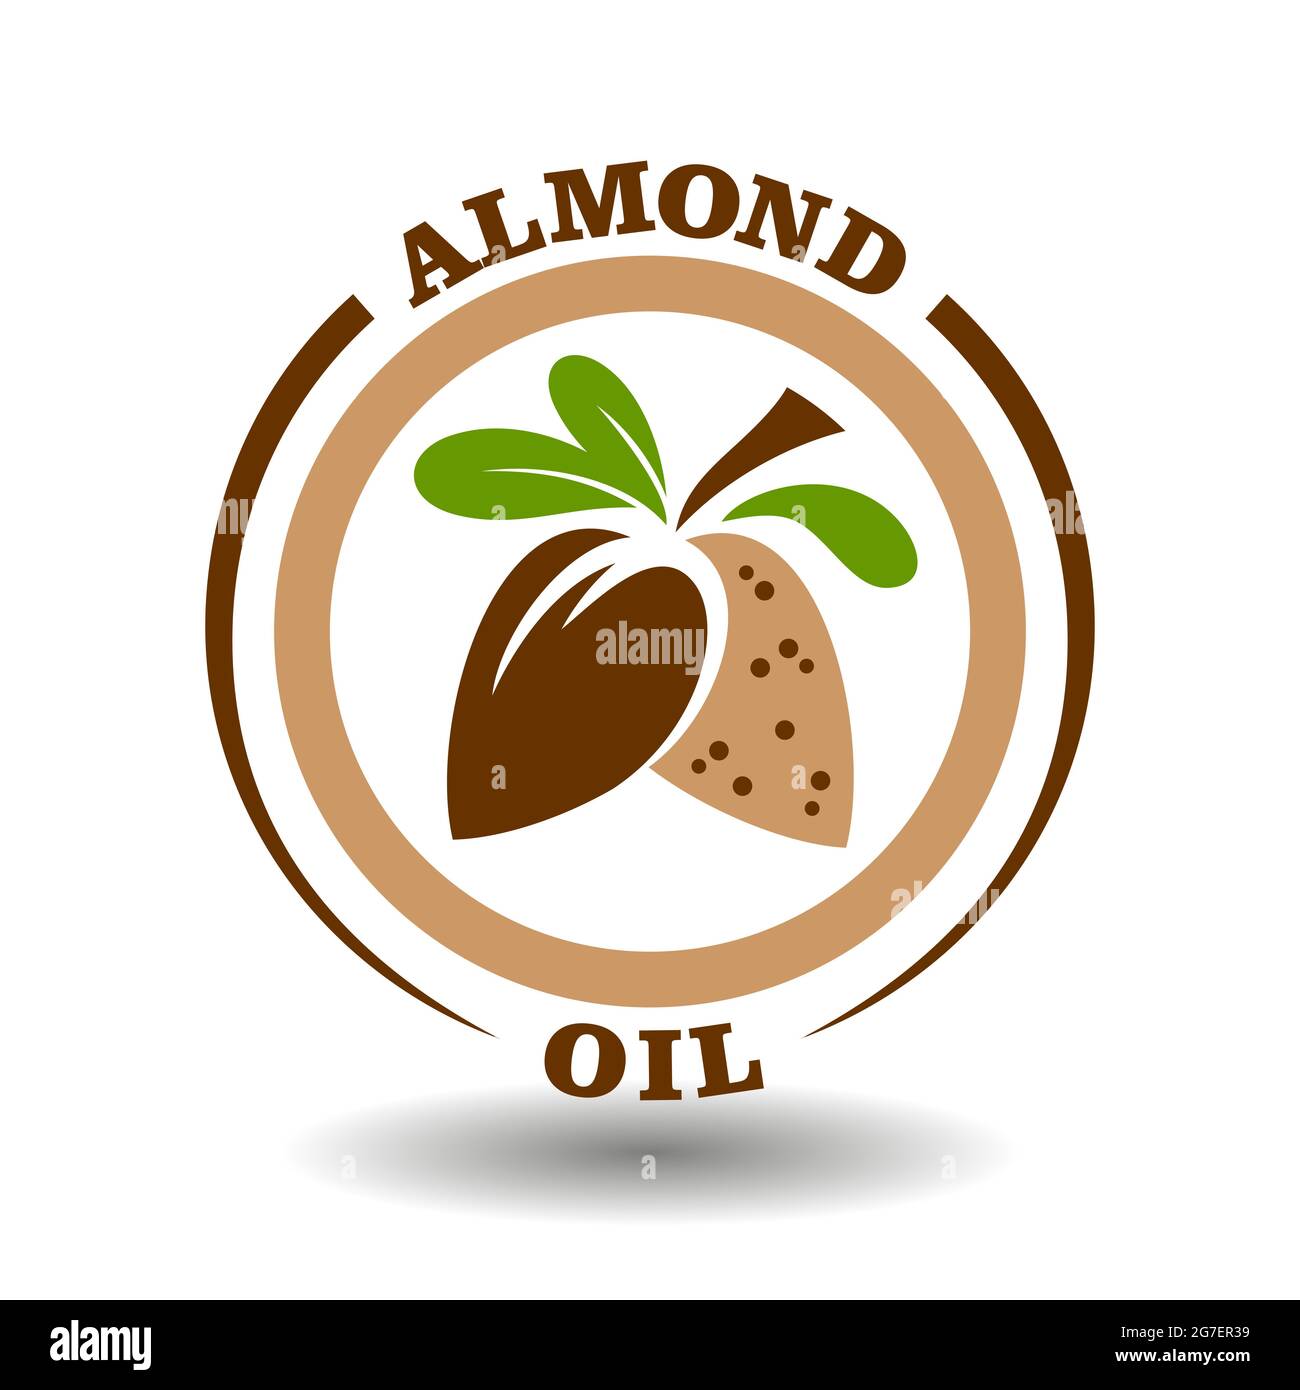 Simple circle logo Almond oil with round half cut nut shells icon and green leaves symbol for labeling product contain natural organic sweet almond mi Stock Vector